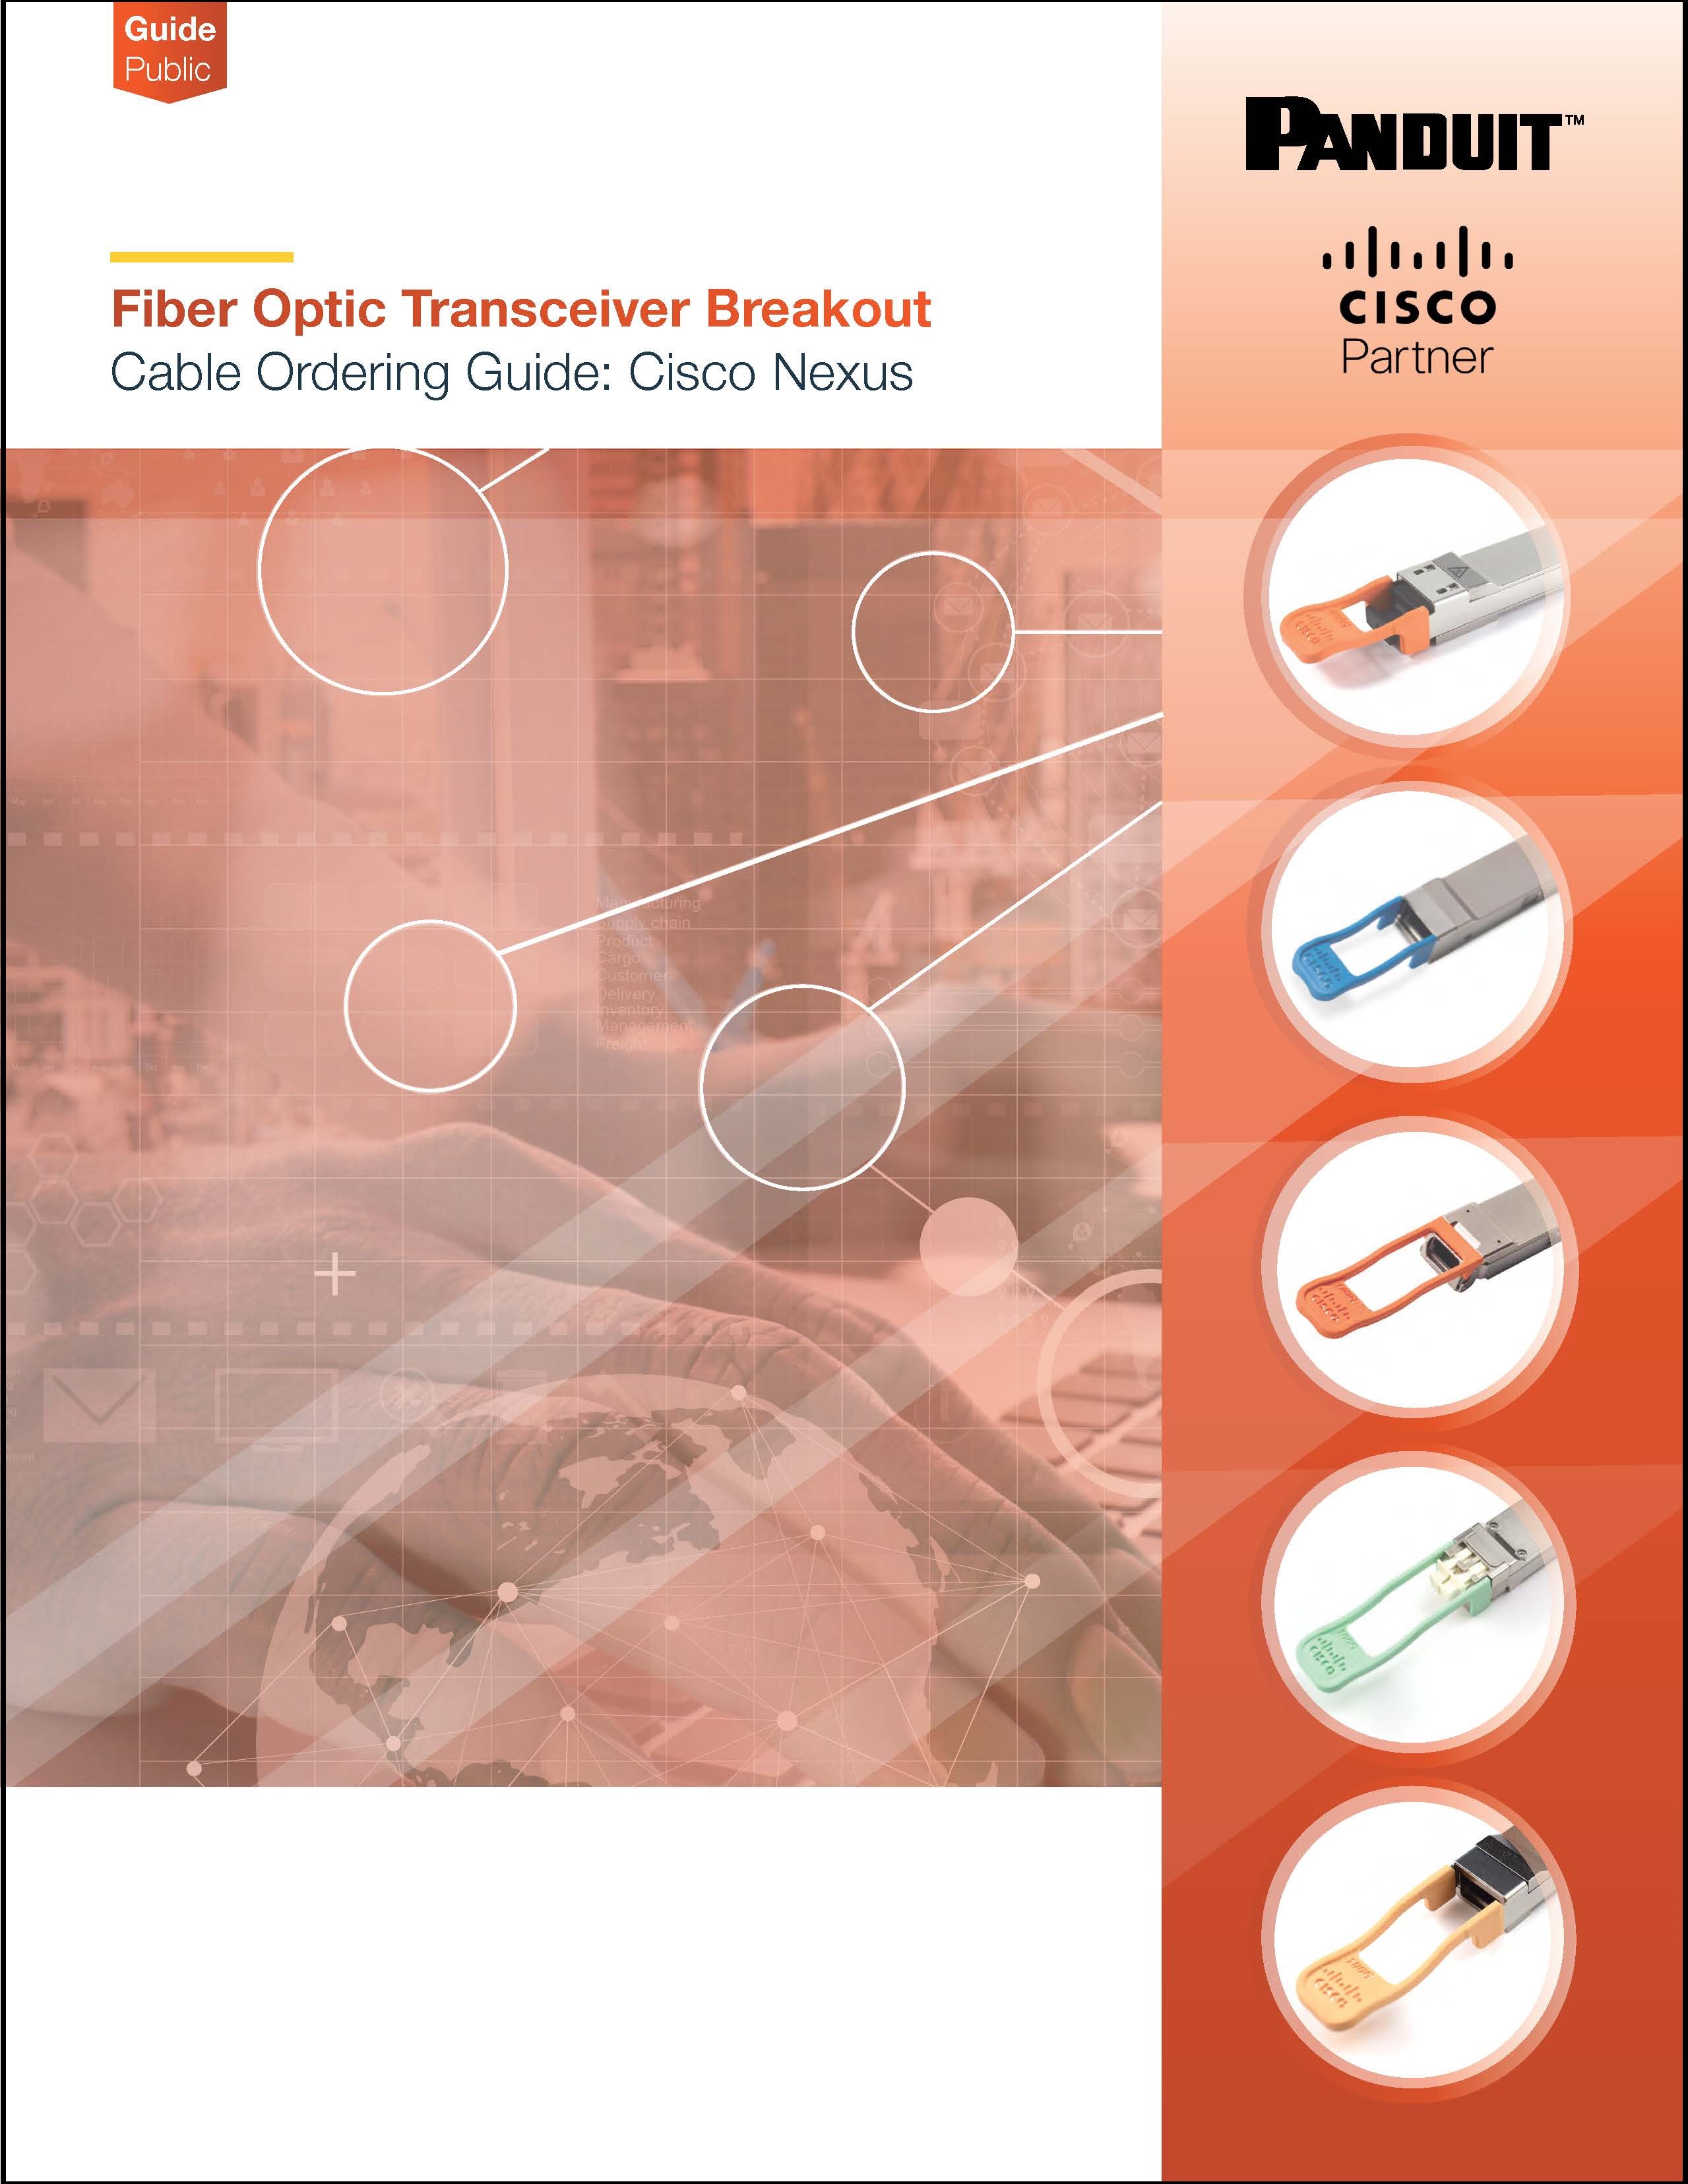 Fiber Optic Transceiver Breakout Cable Ordering Guide